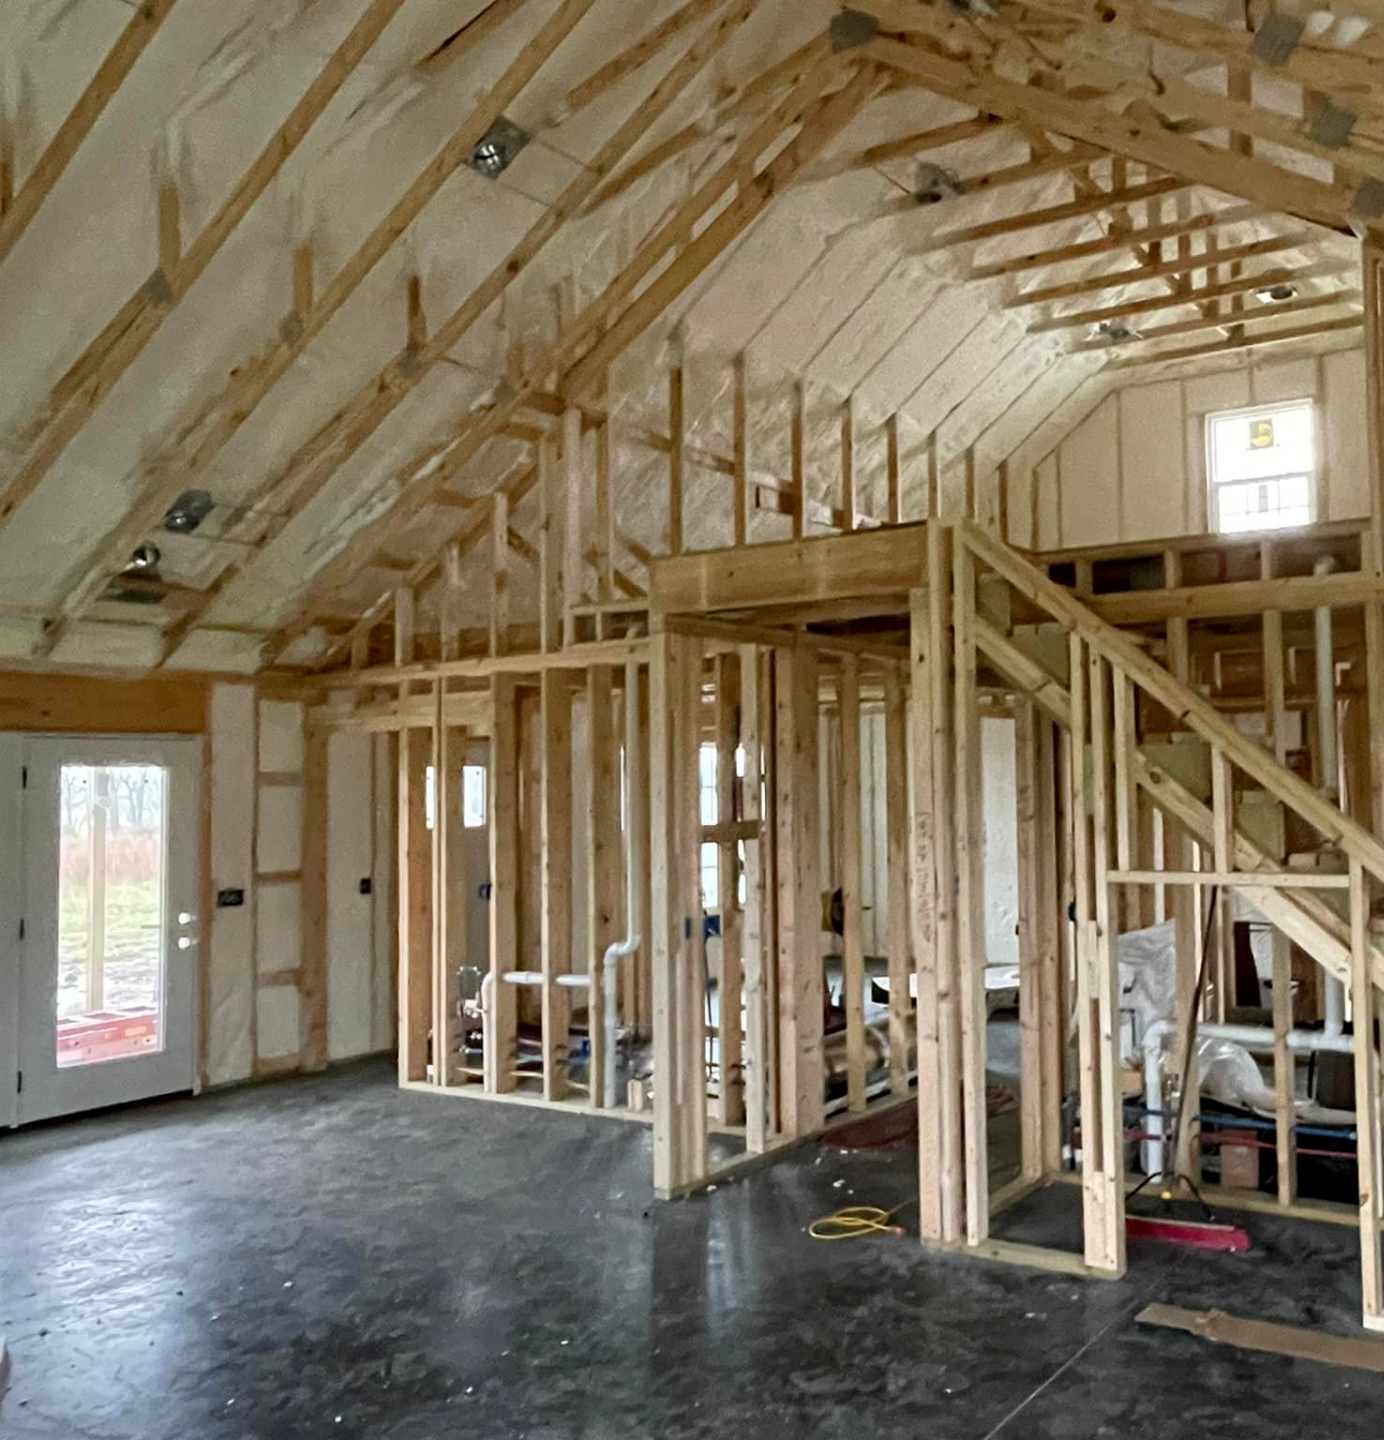 We offer a variety of insulation services to meet your needs and budget in northern and central Missouri.